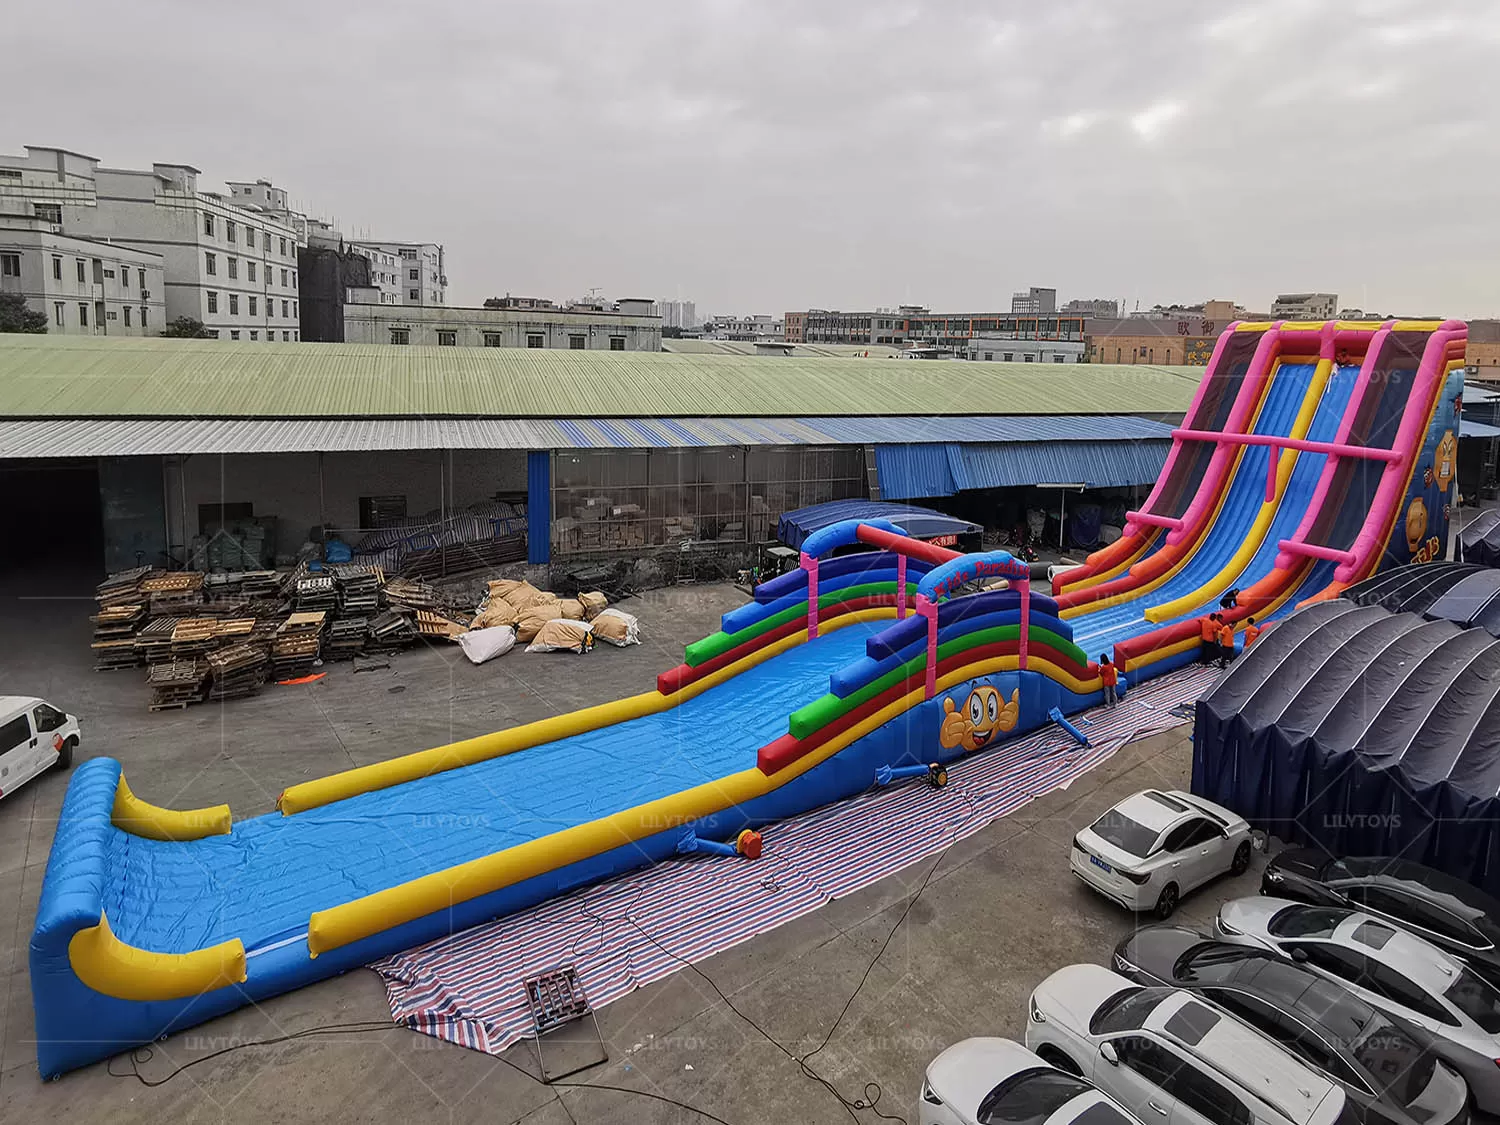 commercial grade pvc inflatable double lanes inflatable water slide for kids and adults